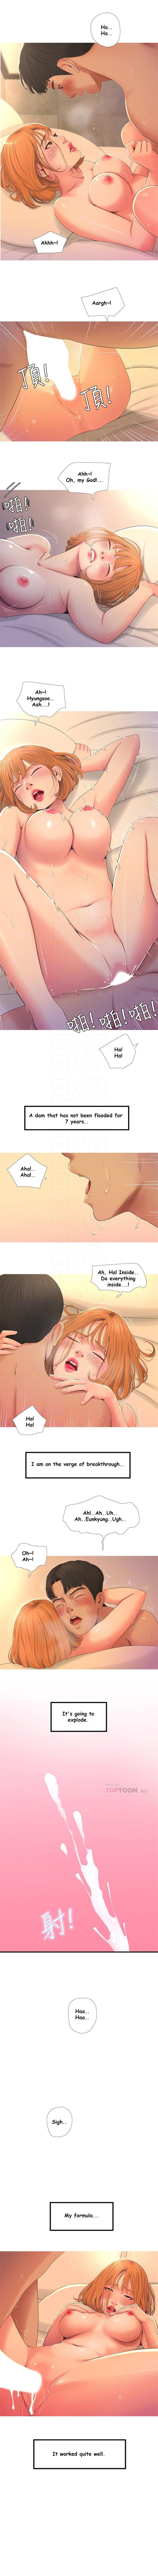 Sologirl One's In-Laws Virgins Chapter 1-14 (Ongoing) [English] Amateurs Gone - Page 13